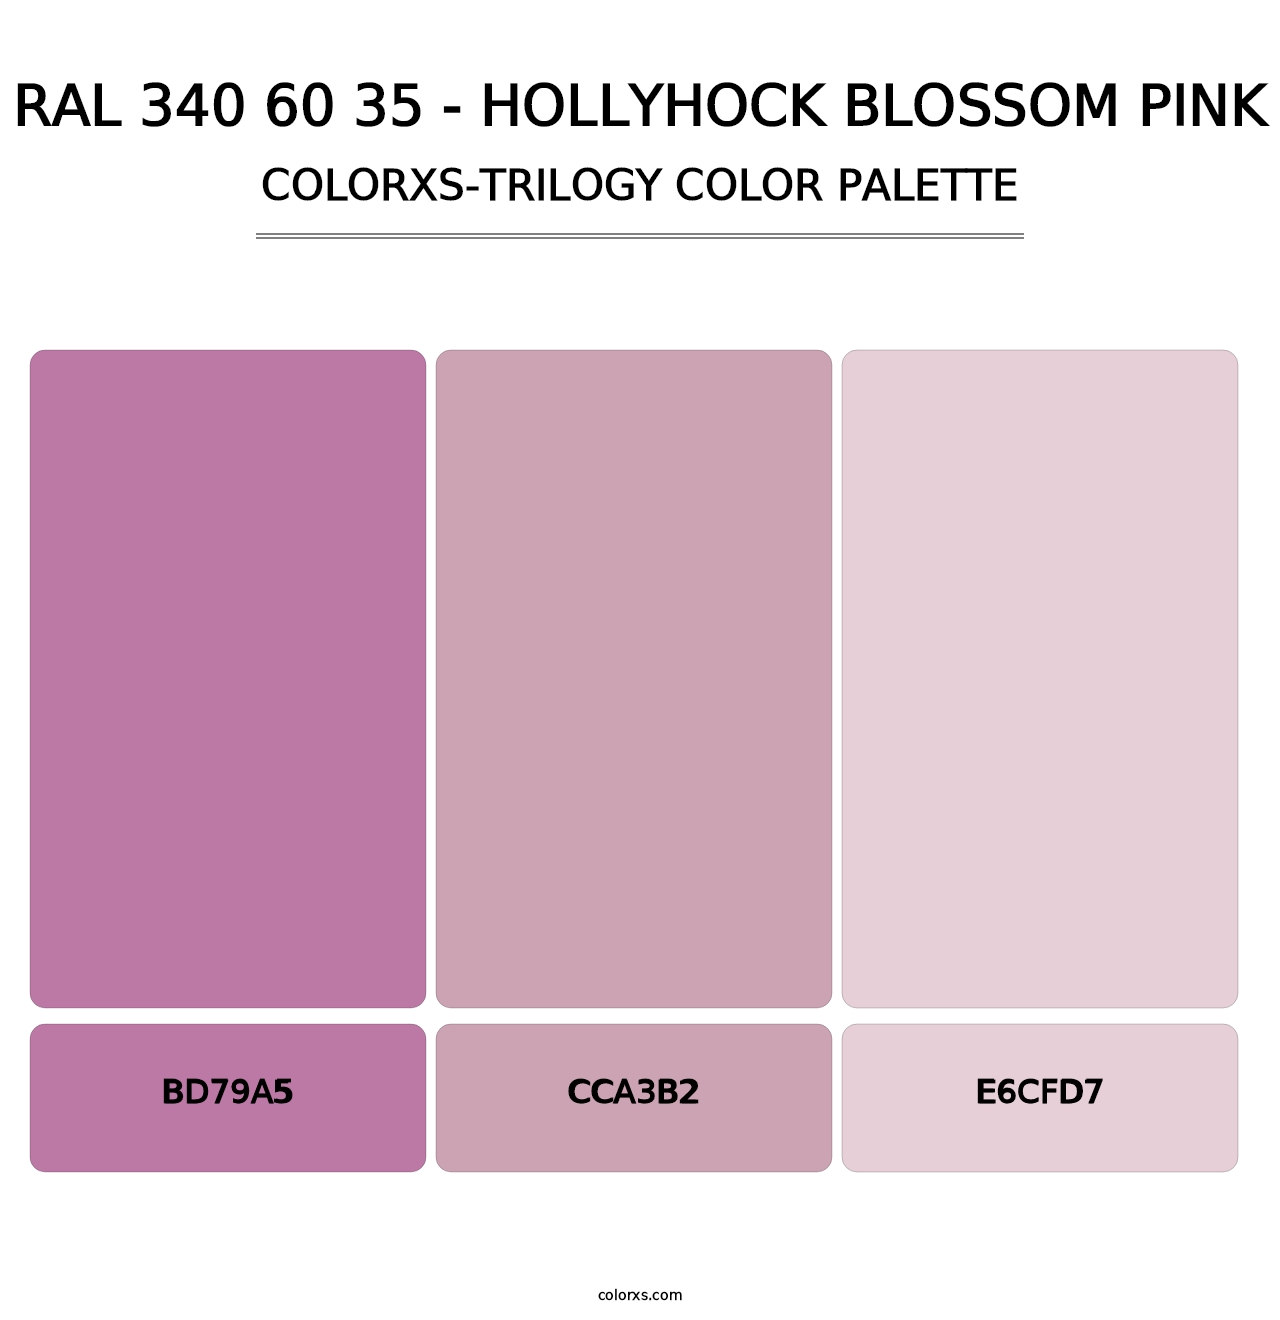 RAL 340 60 35 - Hollyhock Blossom Pink - Colorxs Trilogy Palette